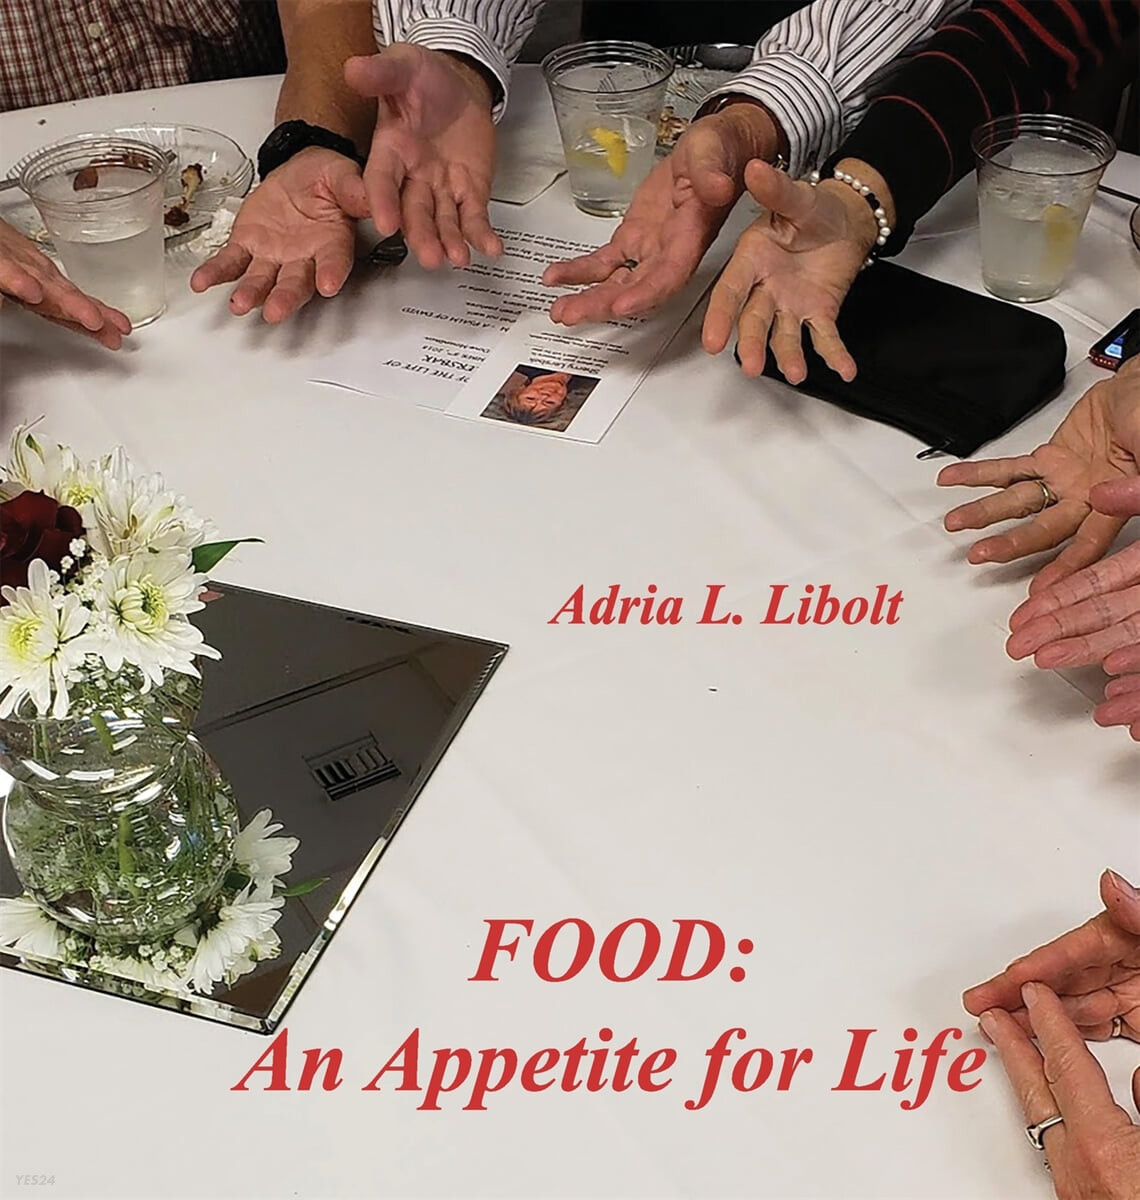 Food (An Appetite for Life)